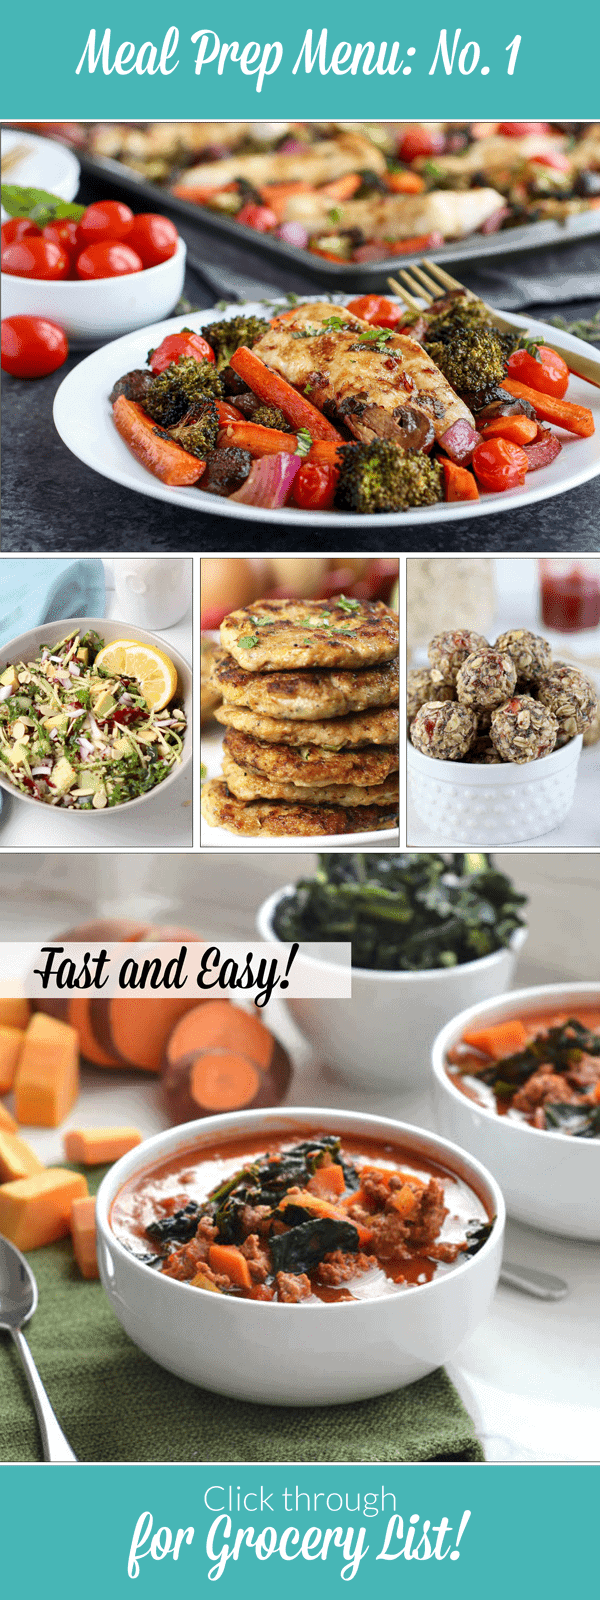 Weekly Meal Prep Menu: No. 1 featuring 5 fast and easy recipes you can make on the weekend. Gluten-free | Dairy-free | Family-friendly The Real Food Dietitians | https://therealfooddietitians.com/weekly-meal-prep-menu-no-1/